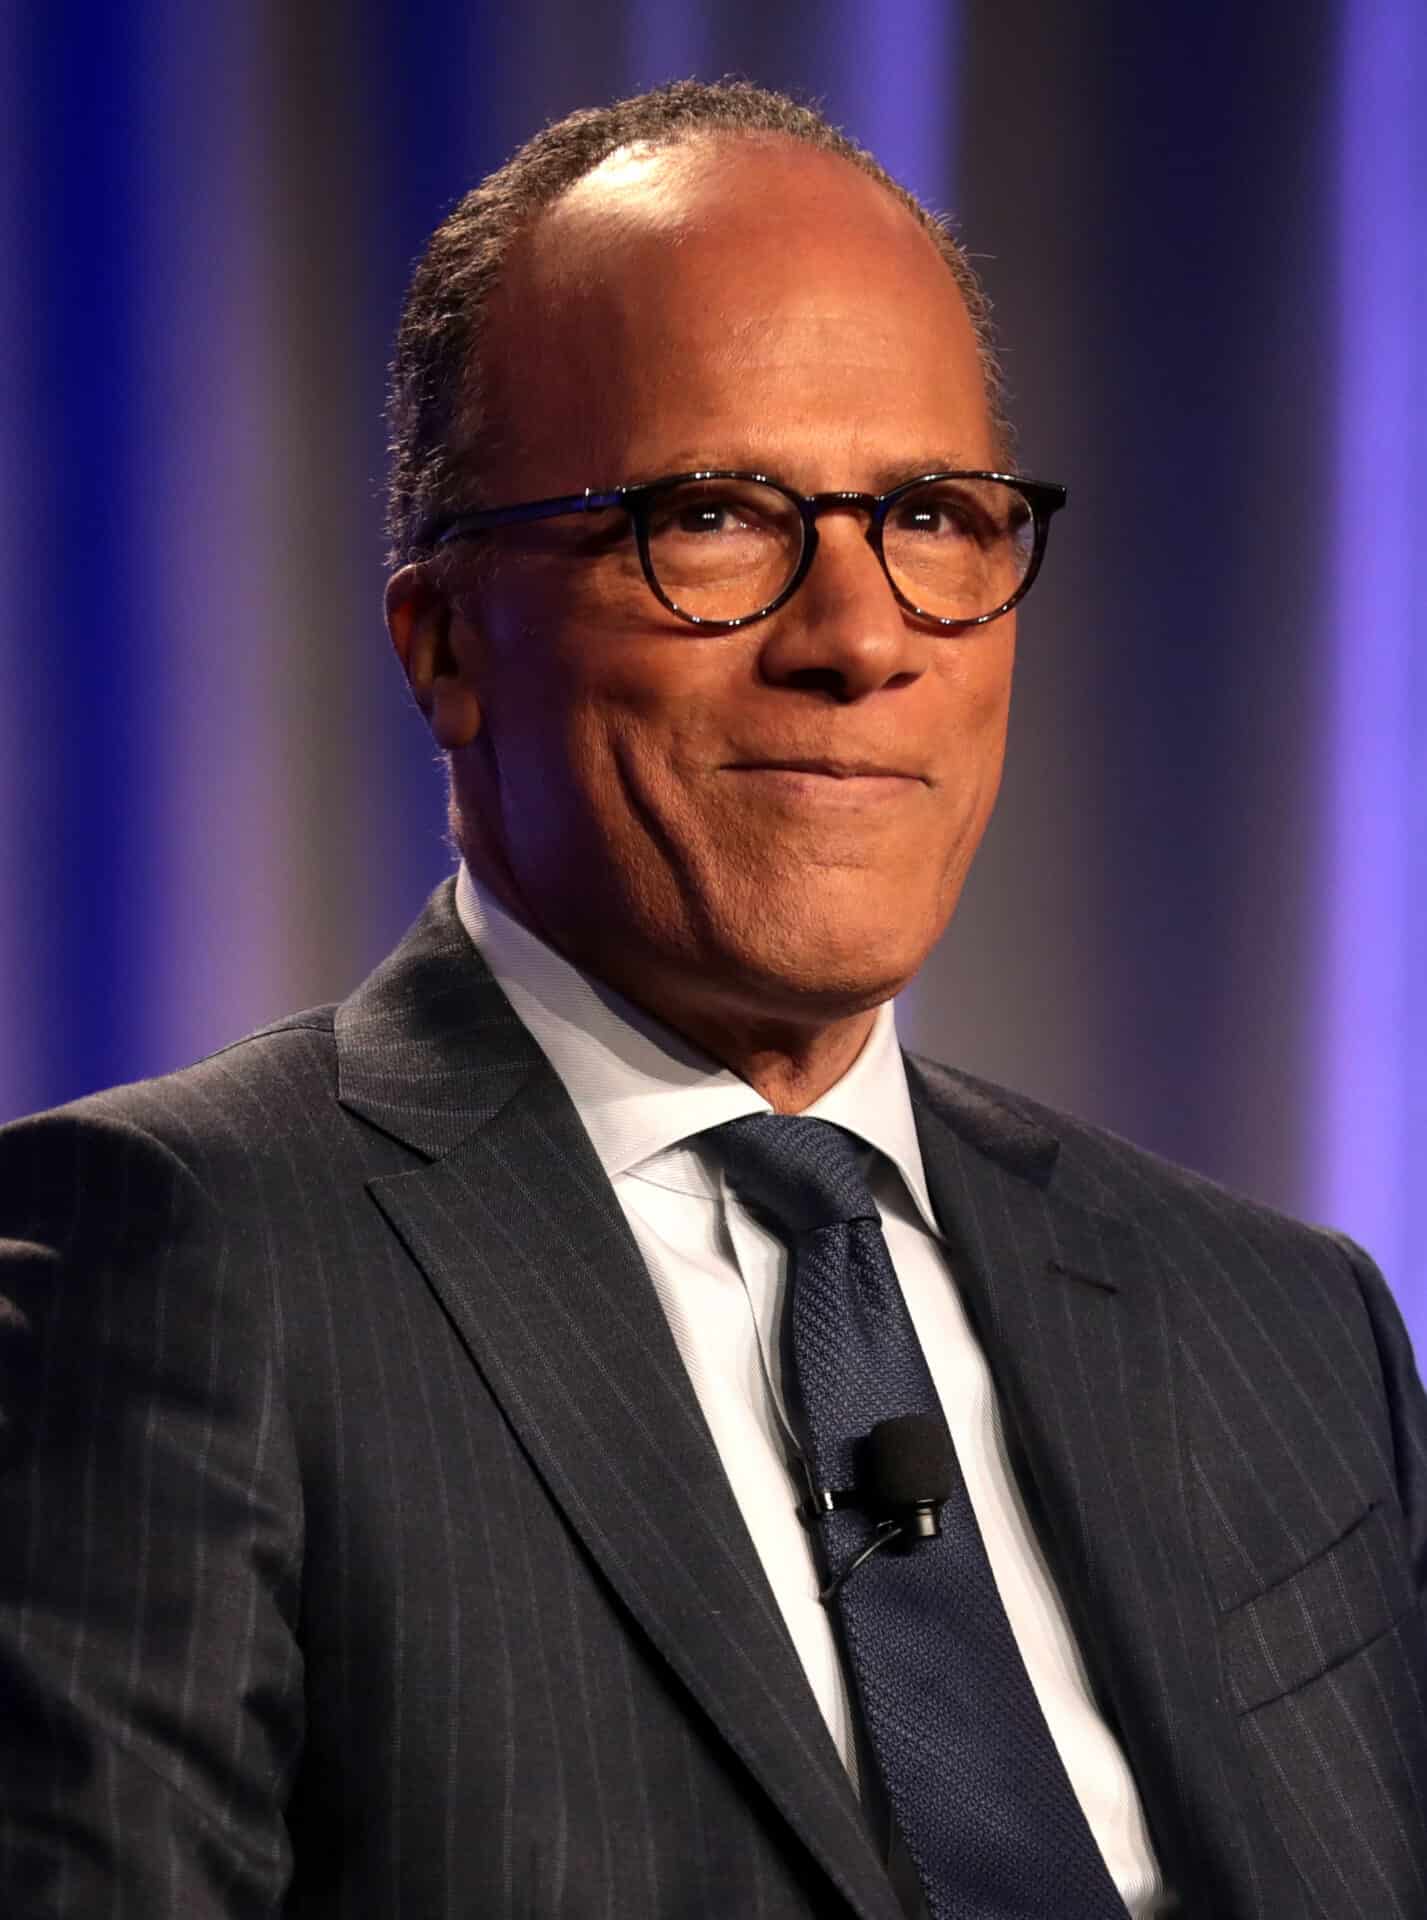 How rich is Lester Holt?